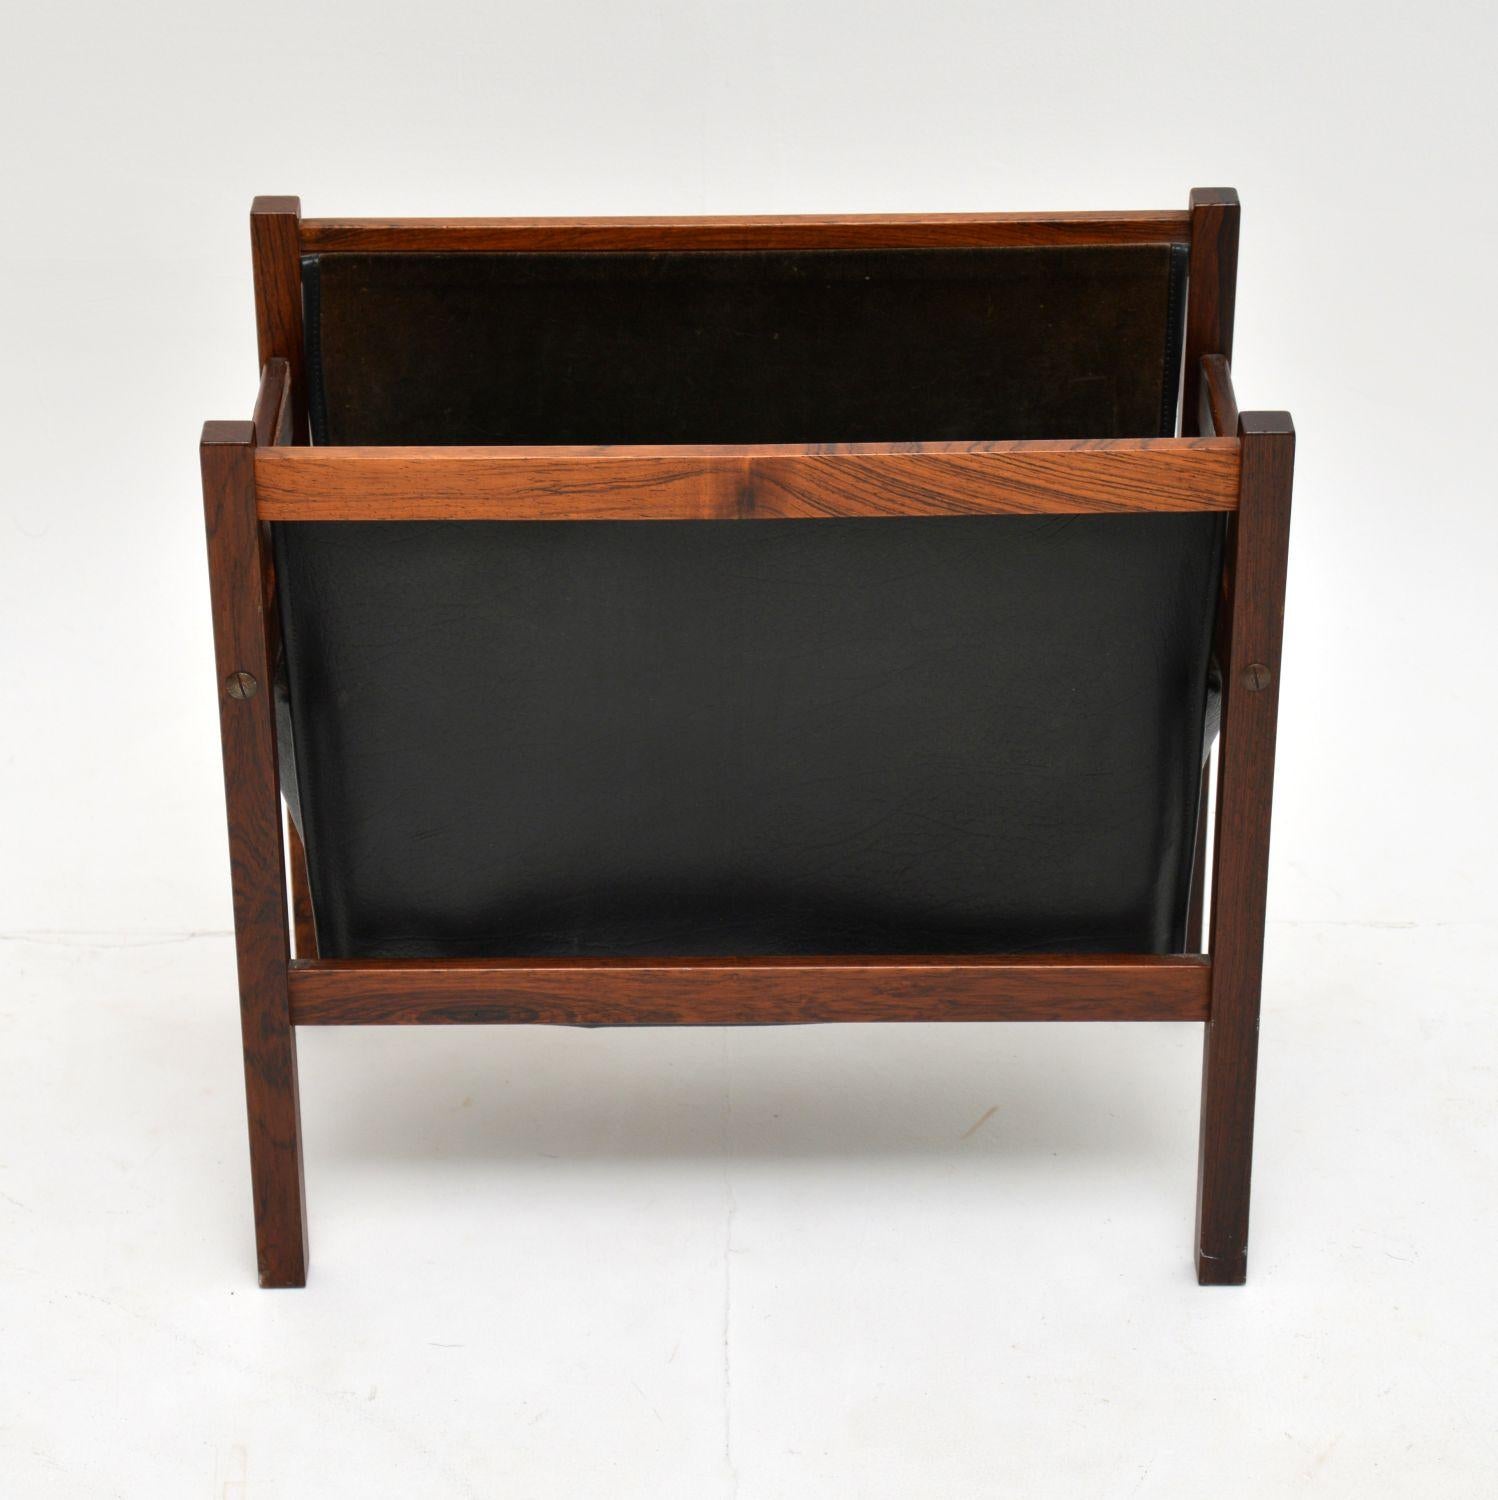 A stunning vintage paper rack in wood and leather. This was made in Denmark, it dates from circa 1960s.

It is in super condition for its age, with only some extremely minor wear. The wood is all clean and sturdy, with a beautiful colour and